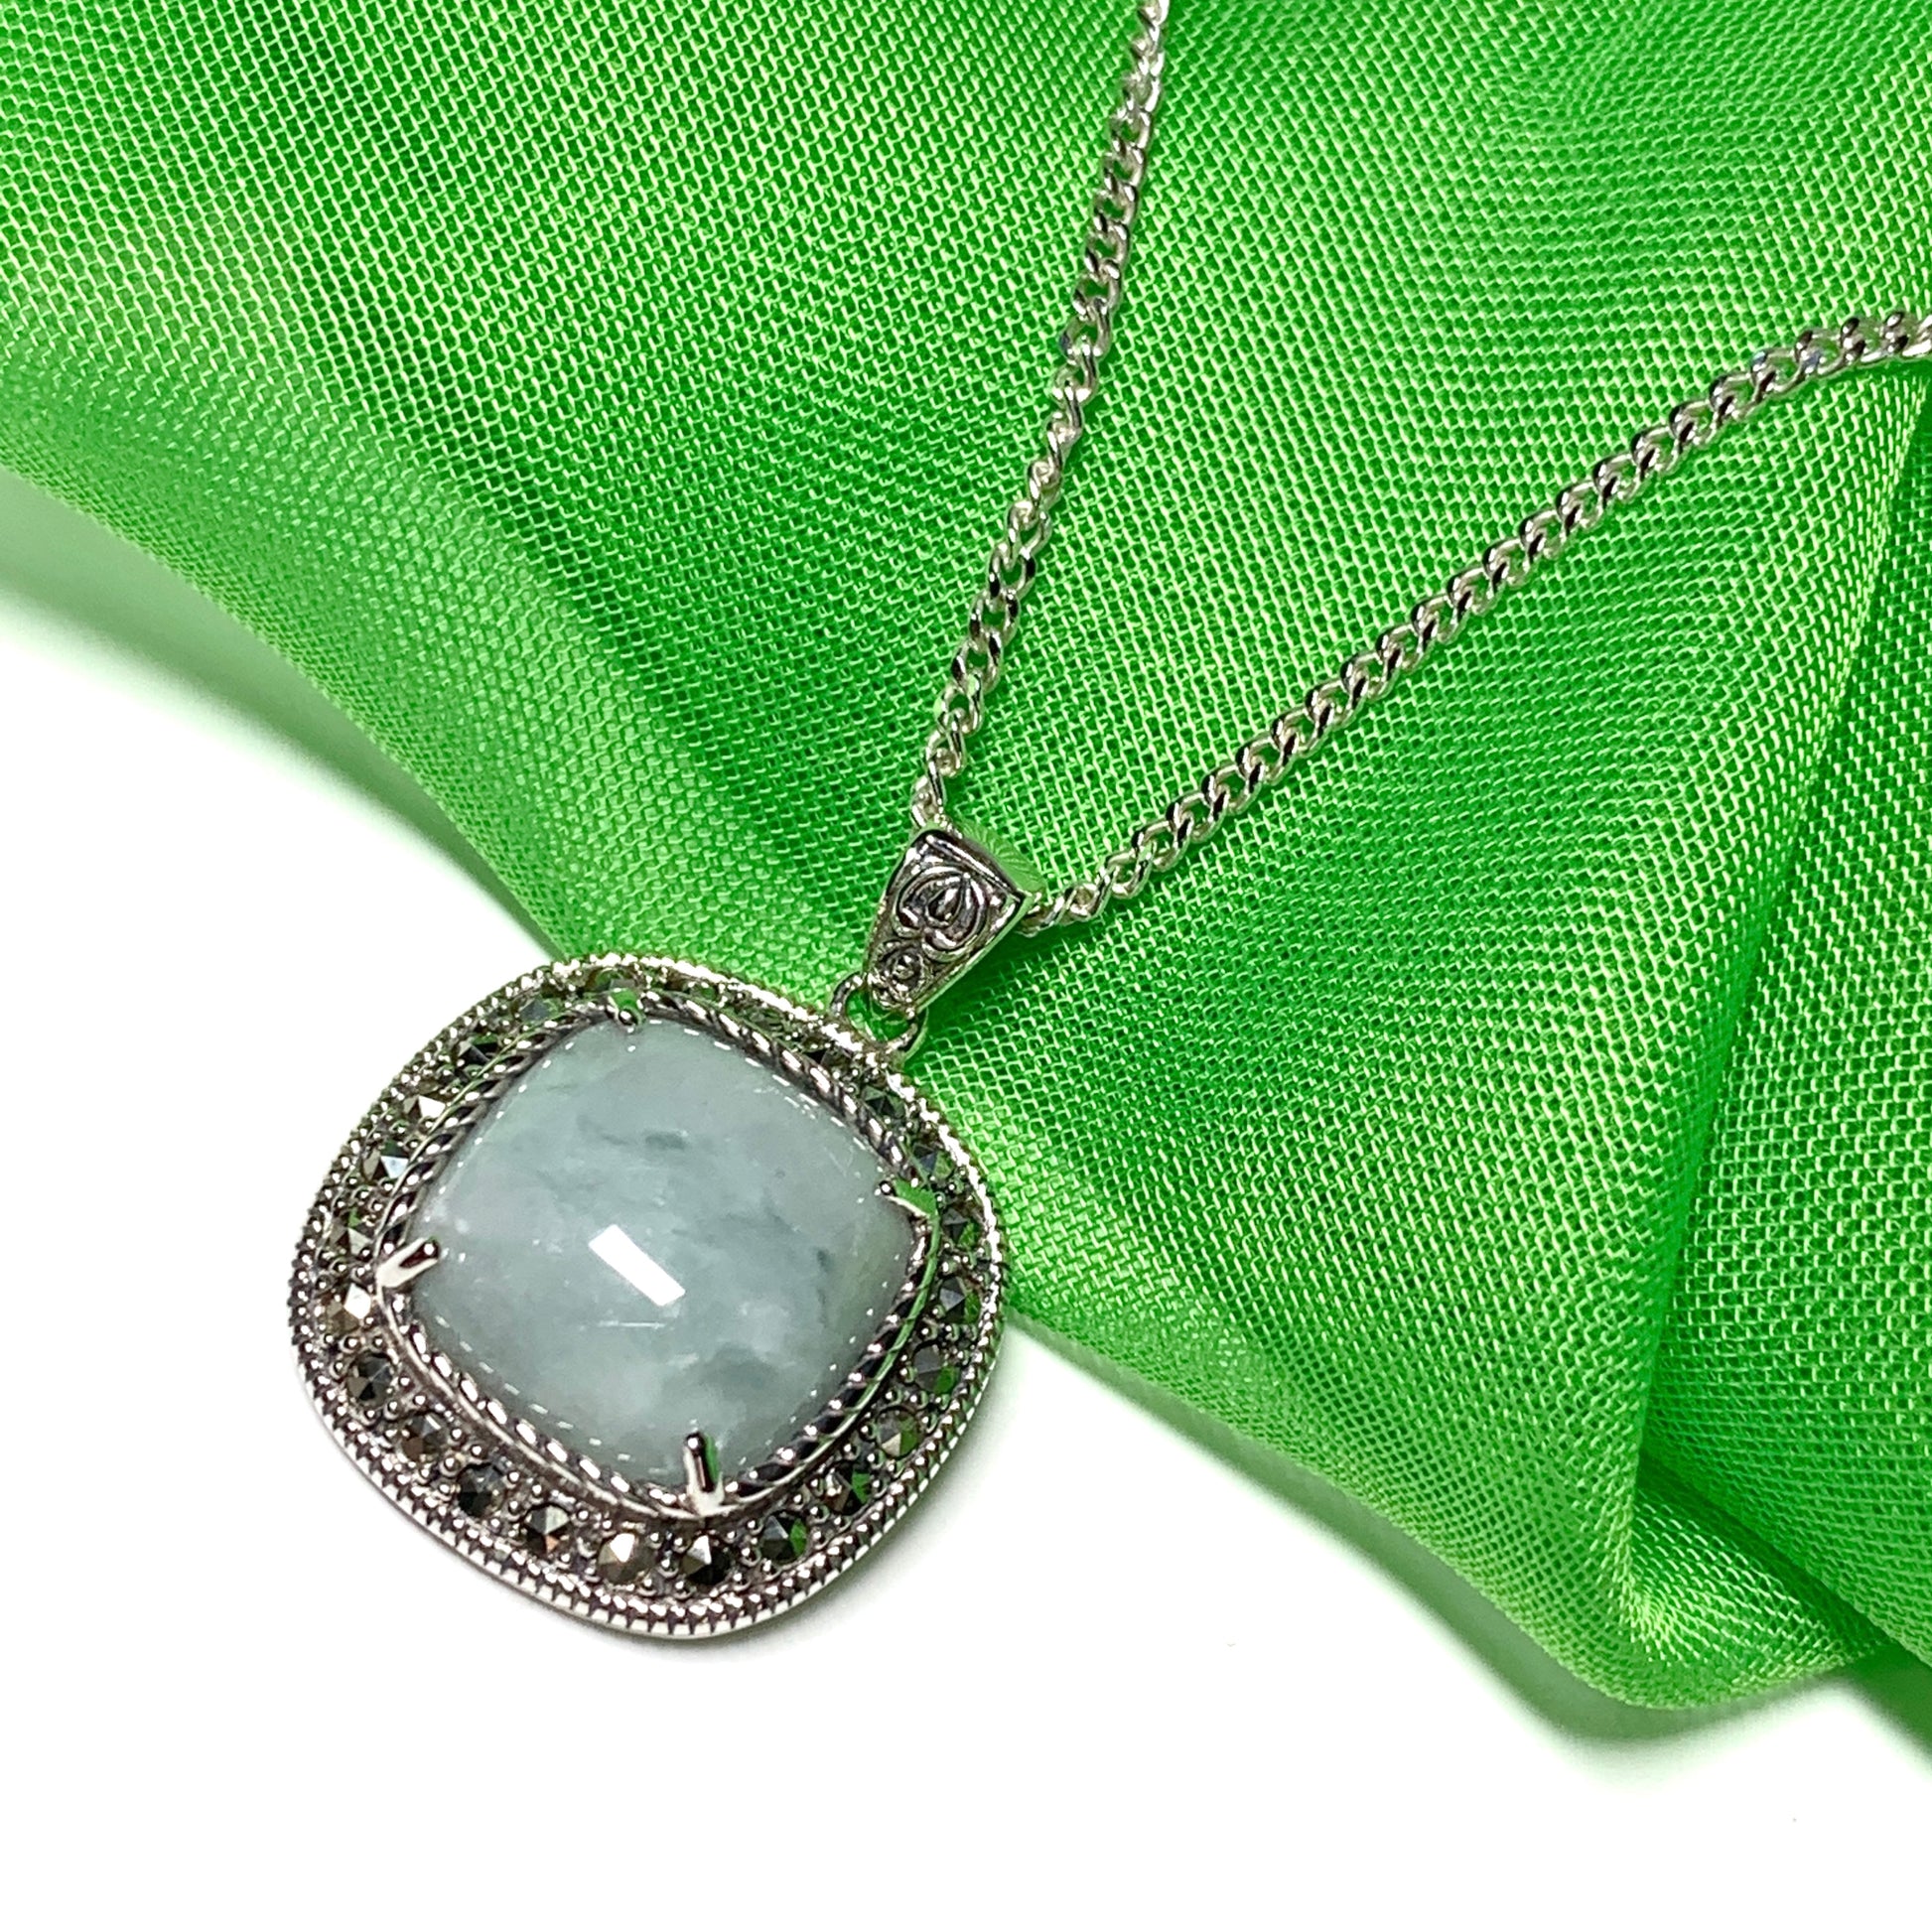 Cushion shaped silver green jade and marcasite necklace pendant